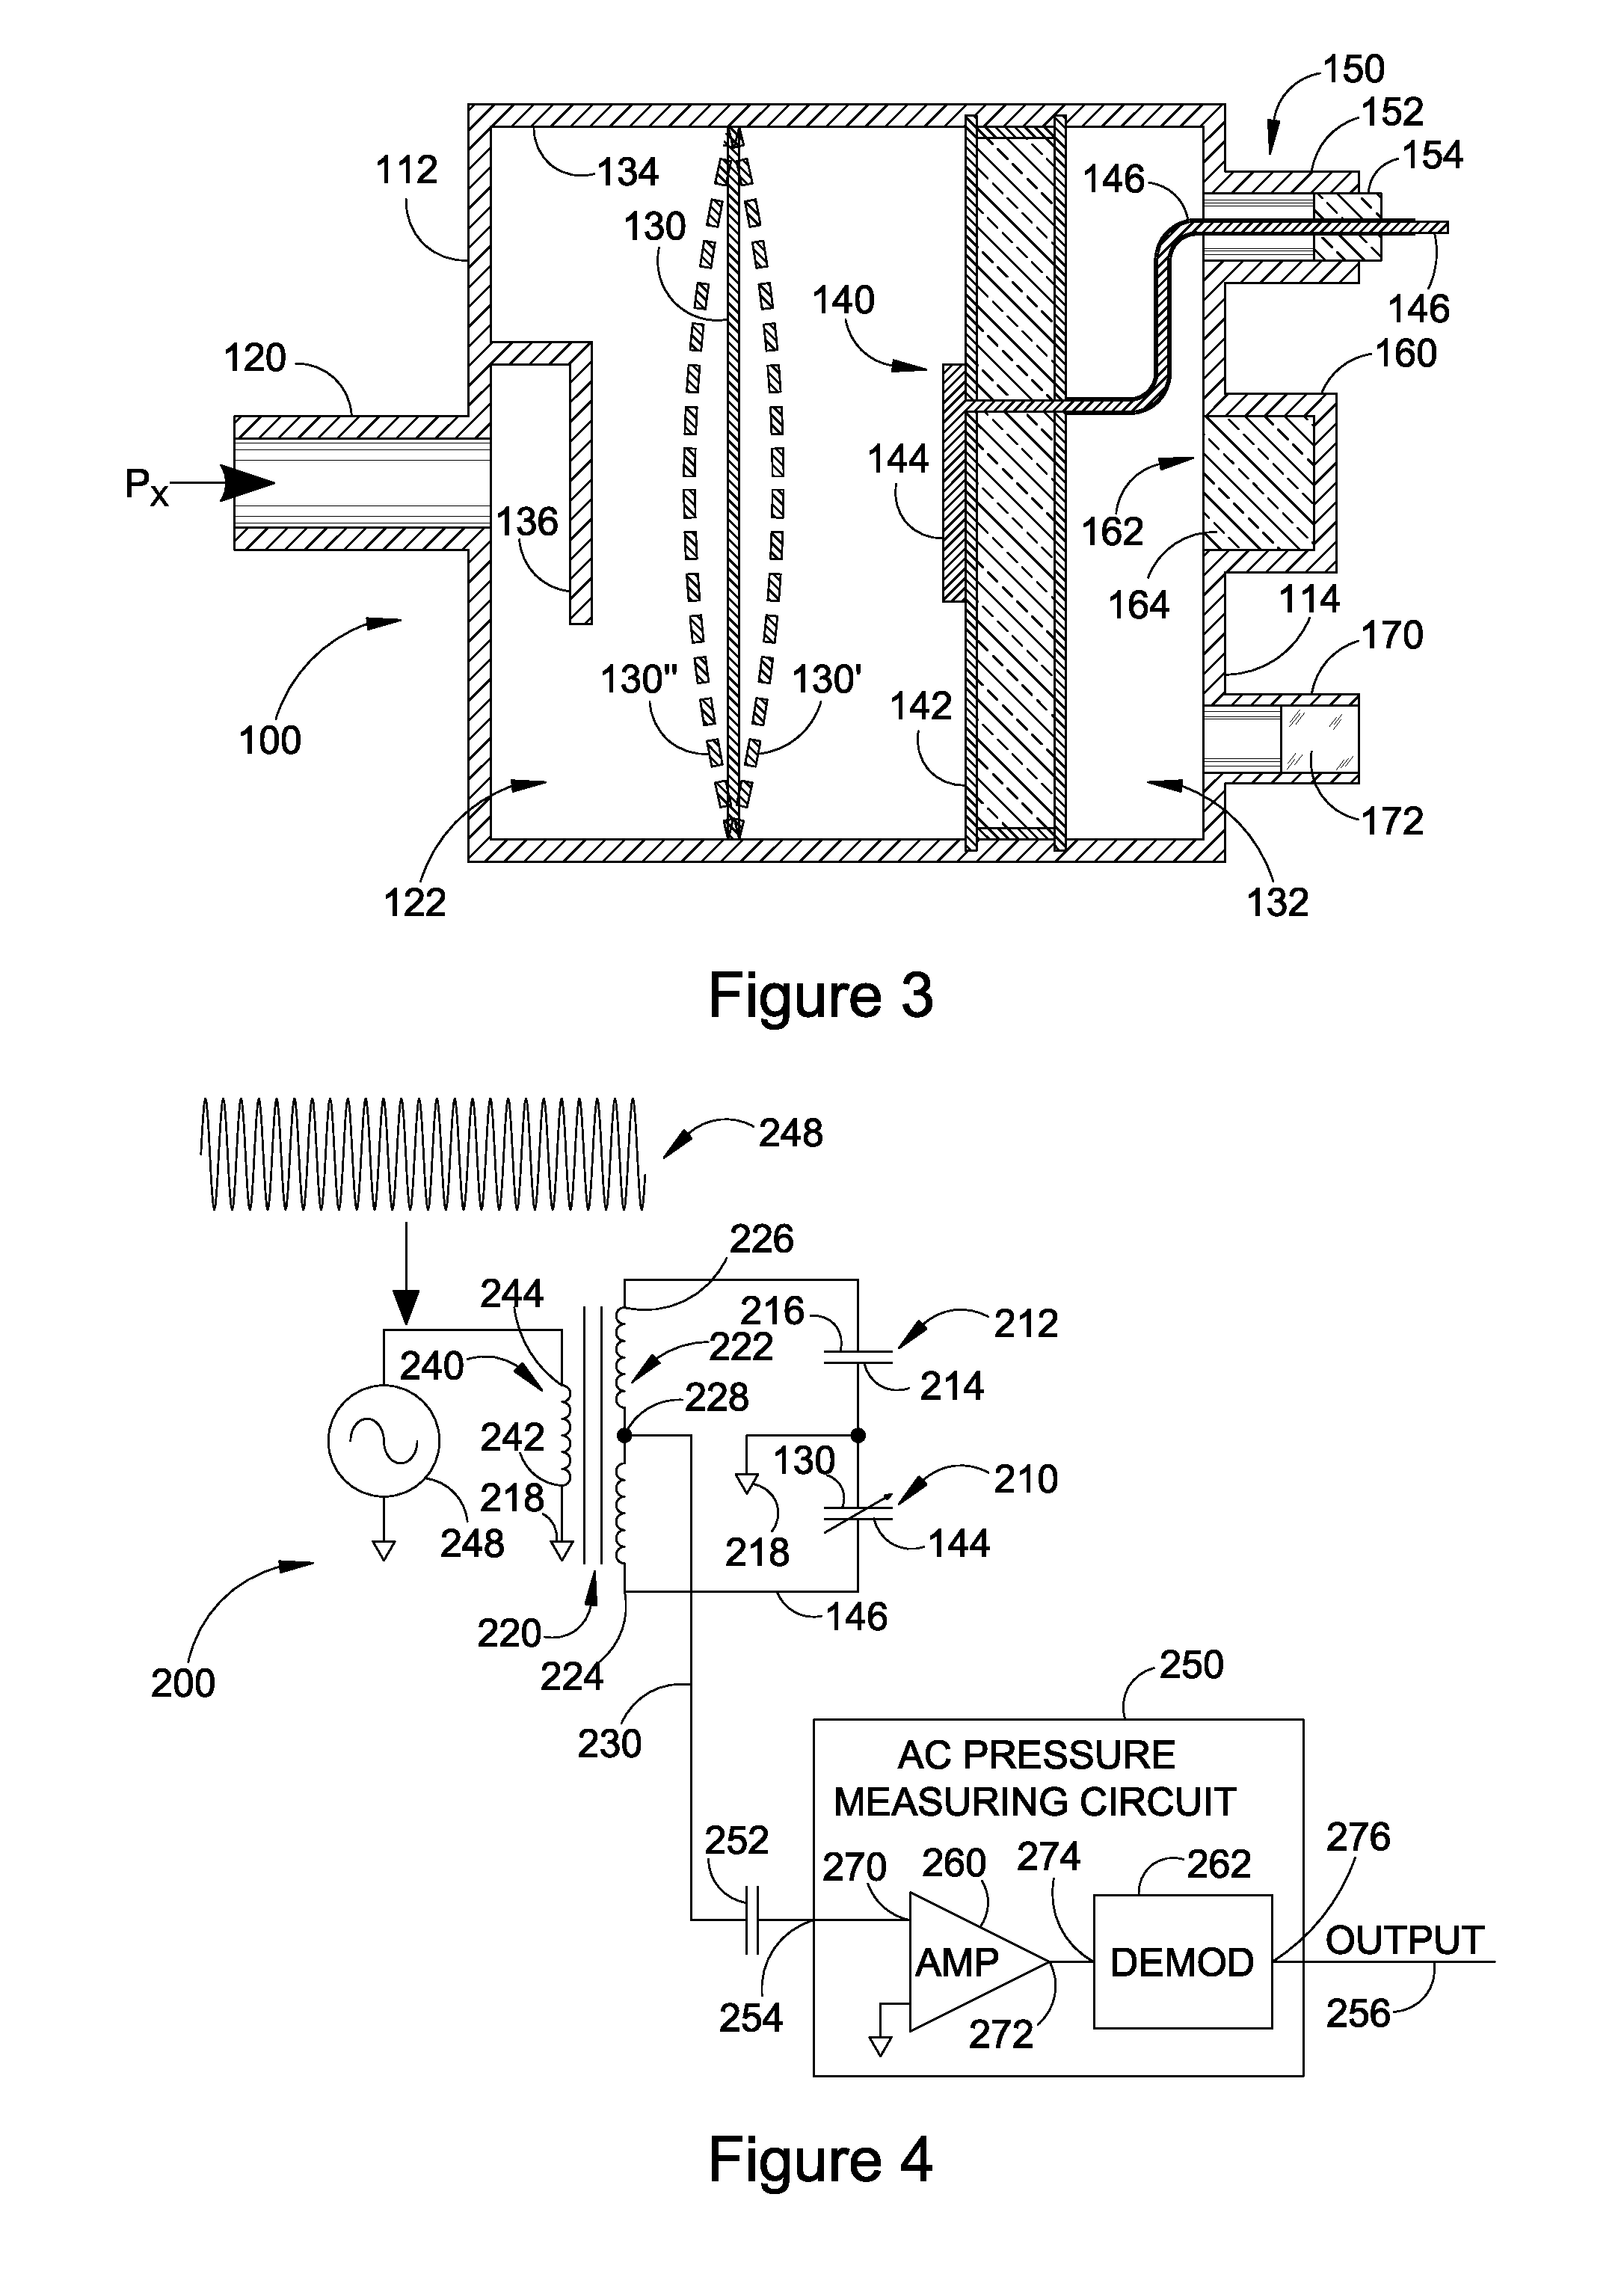 Multi-Axis Tilt Sensor for Correcting Gravitational Effects on the Measurement of Pressure by a Capacitance Diaphragm Gauge